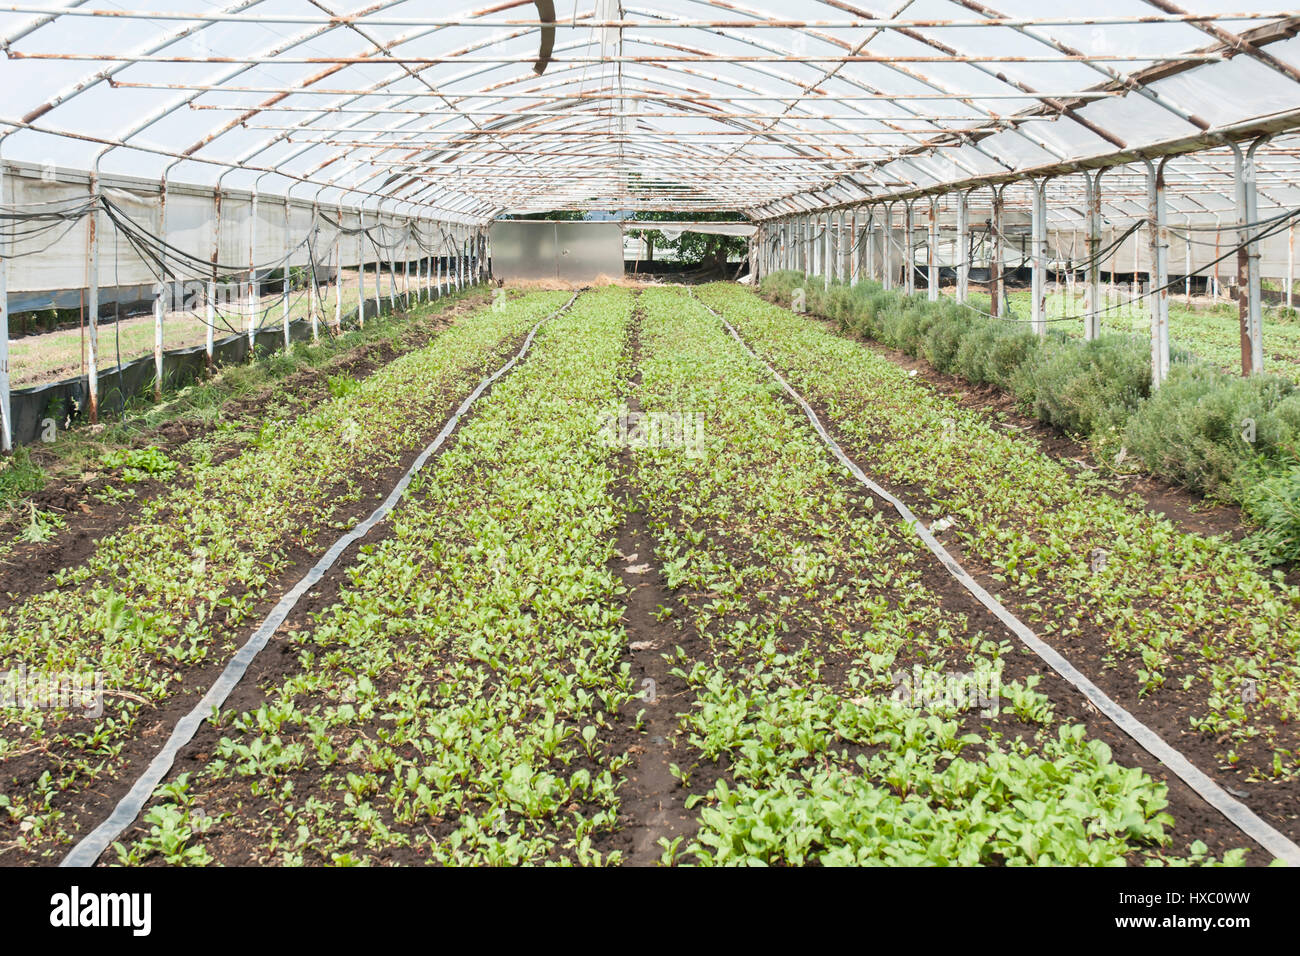 Organic crops growing in a polytunnel (plastic covered greenhouse) Stock Photo